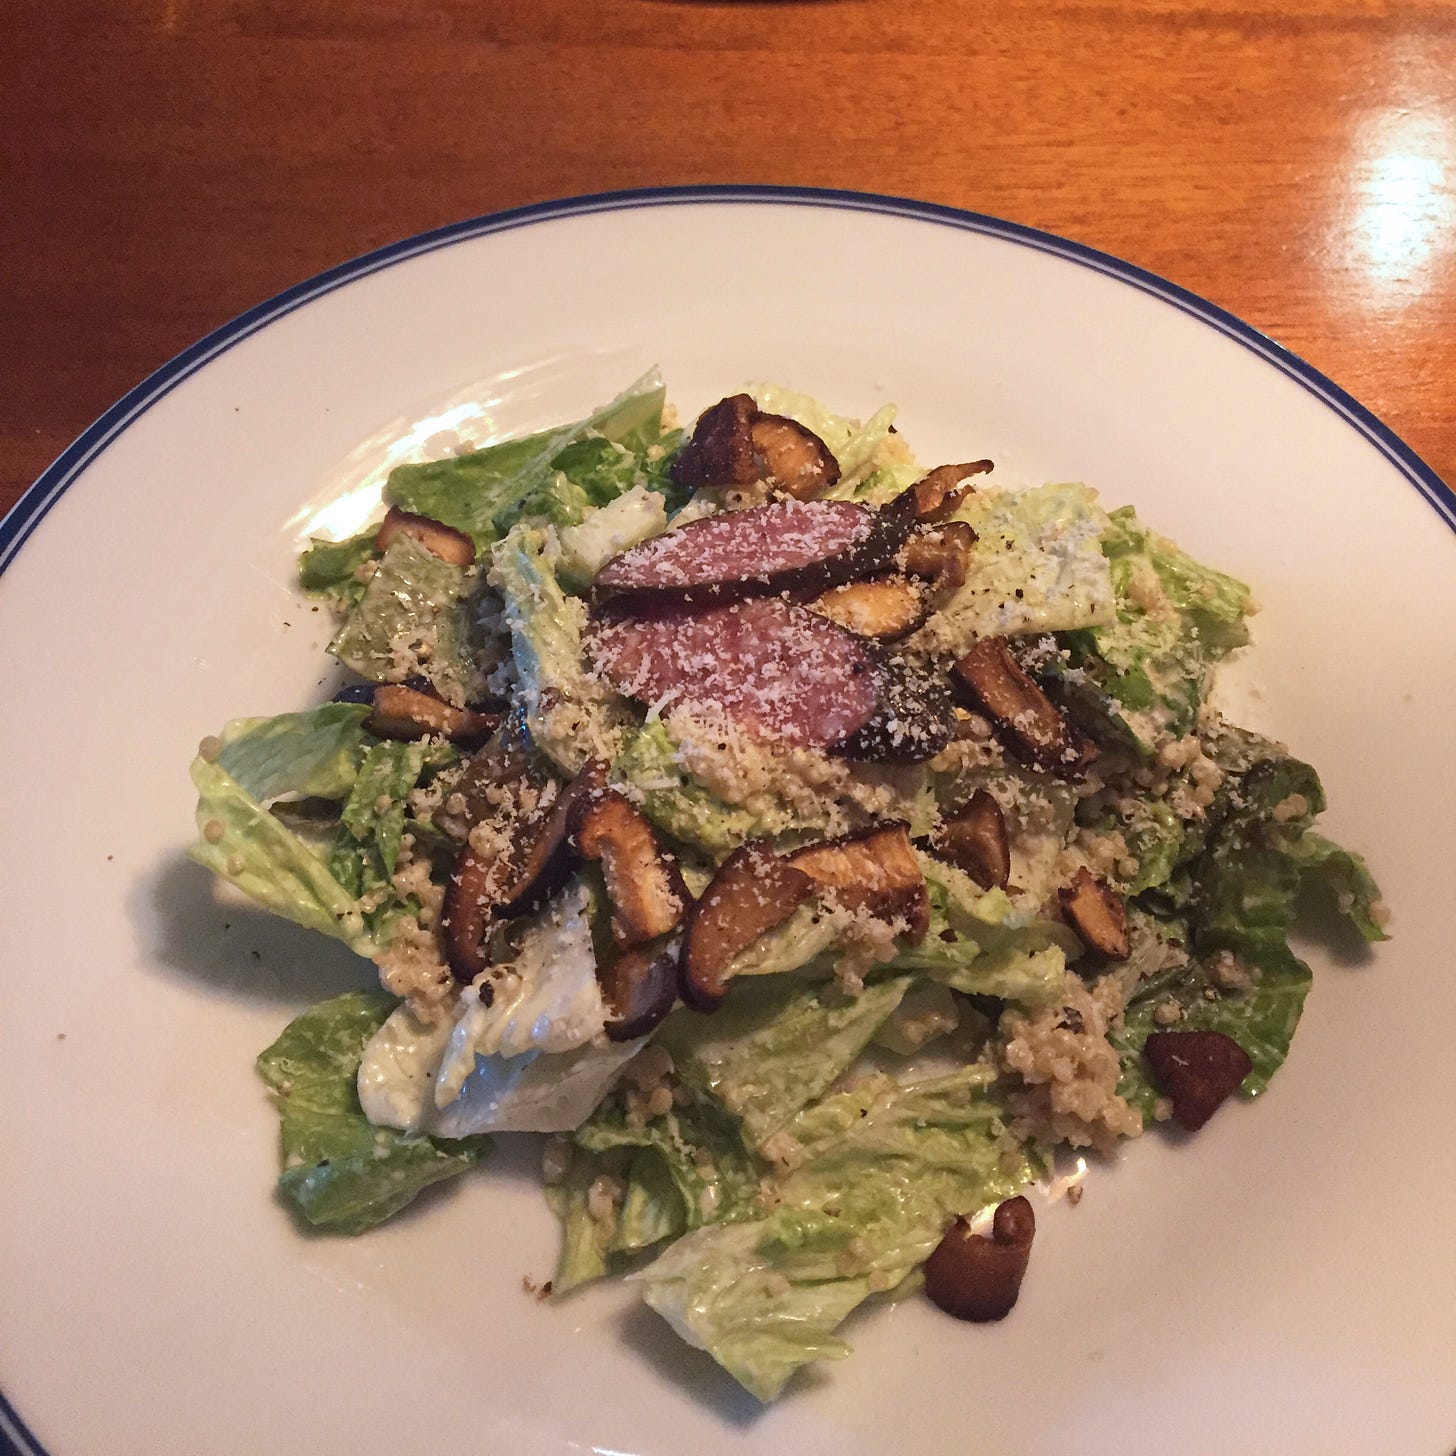 On a white plate, a quinoa Caesar salad topped with pieces of shiitake mushroom, parmesan, and two small pieces of salami.